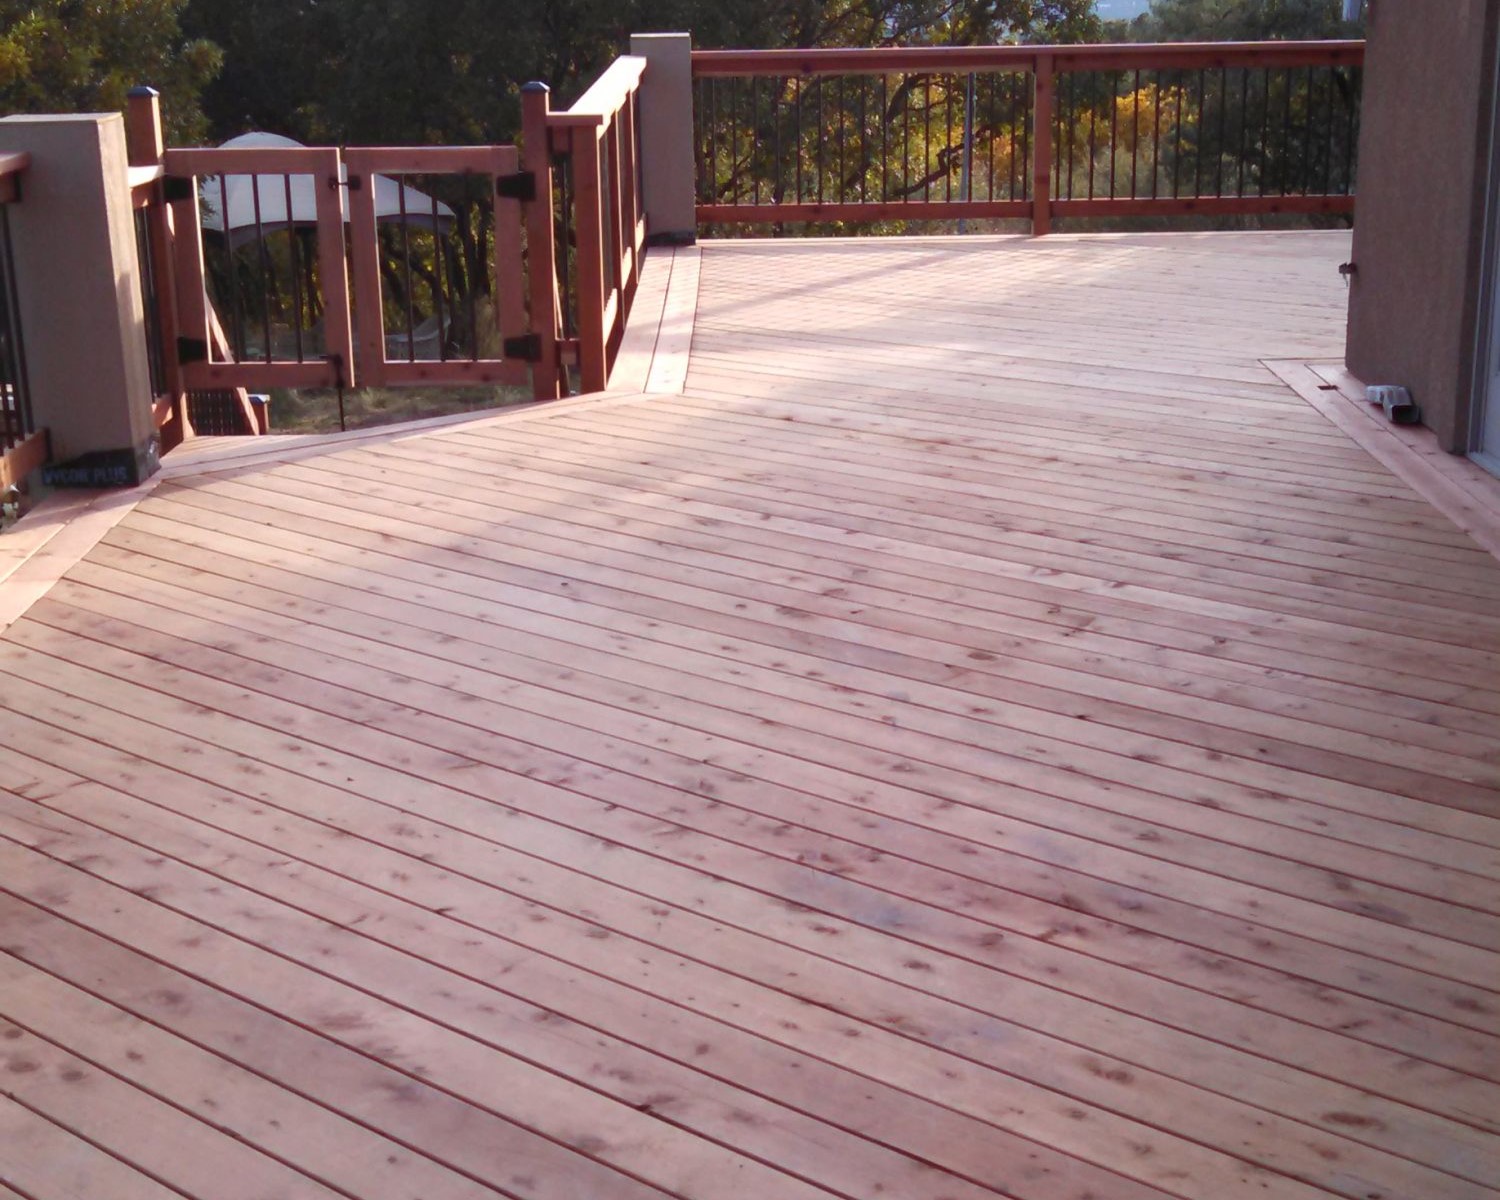 Heart Redwood deck, before it is stained, with the decking laid at 45-degrees and double picture frame board